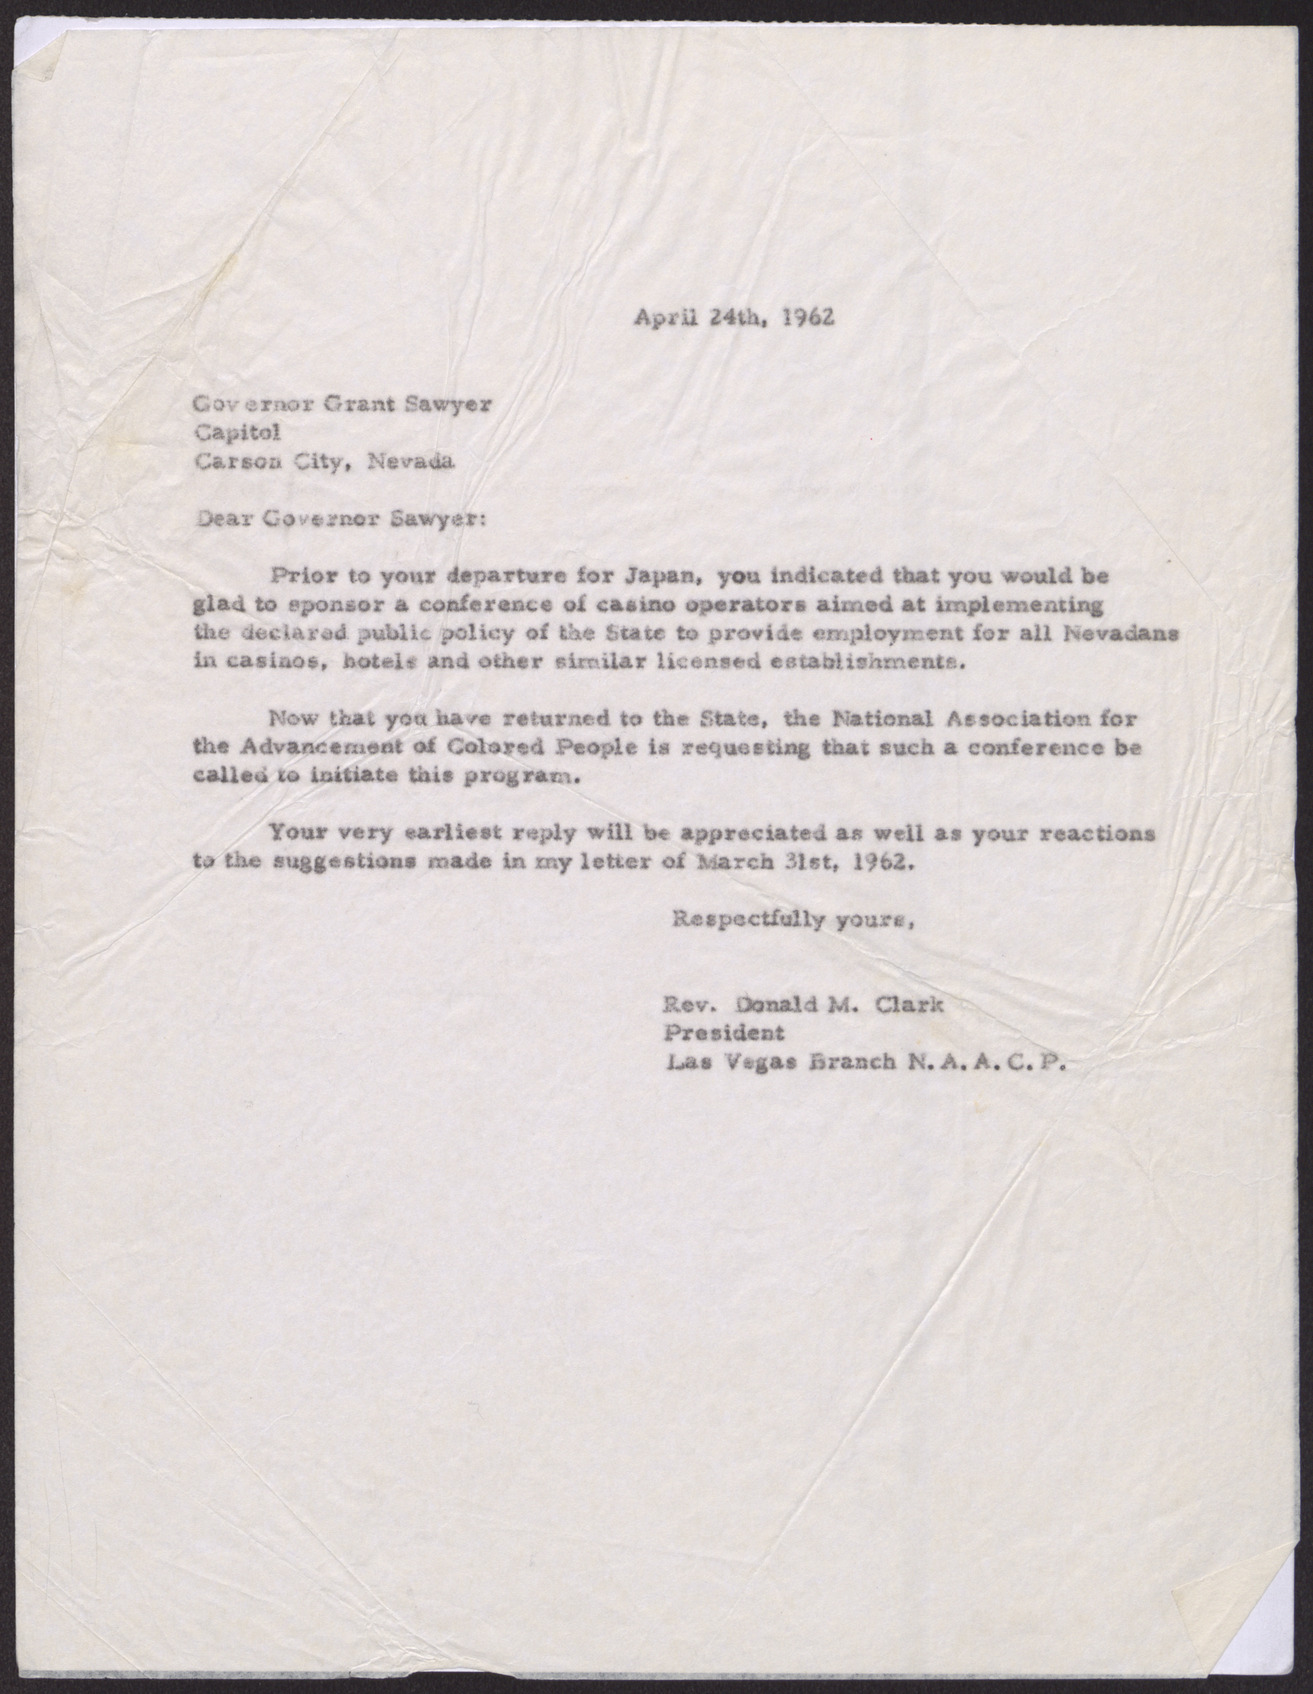 Letter to Governor Grant Sawyer from Rev. Donald M. Clark, April 24, 1962